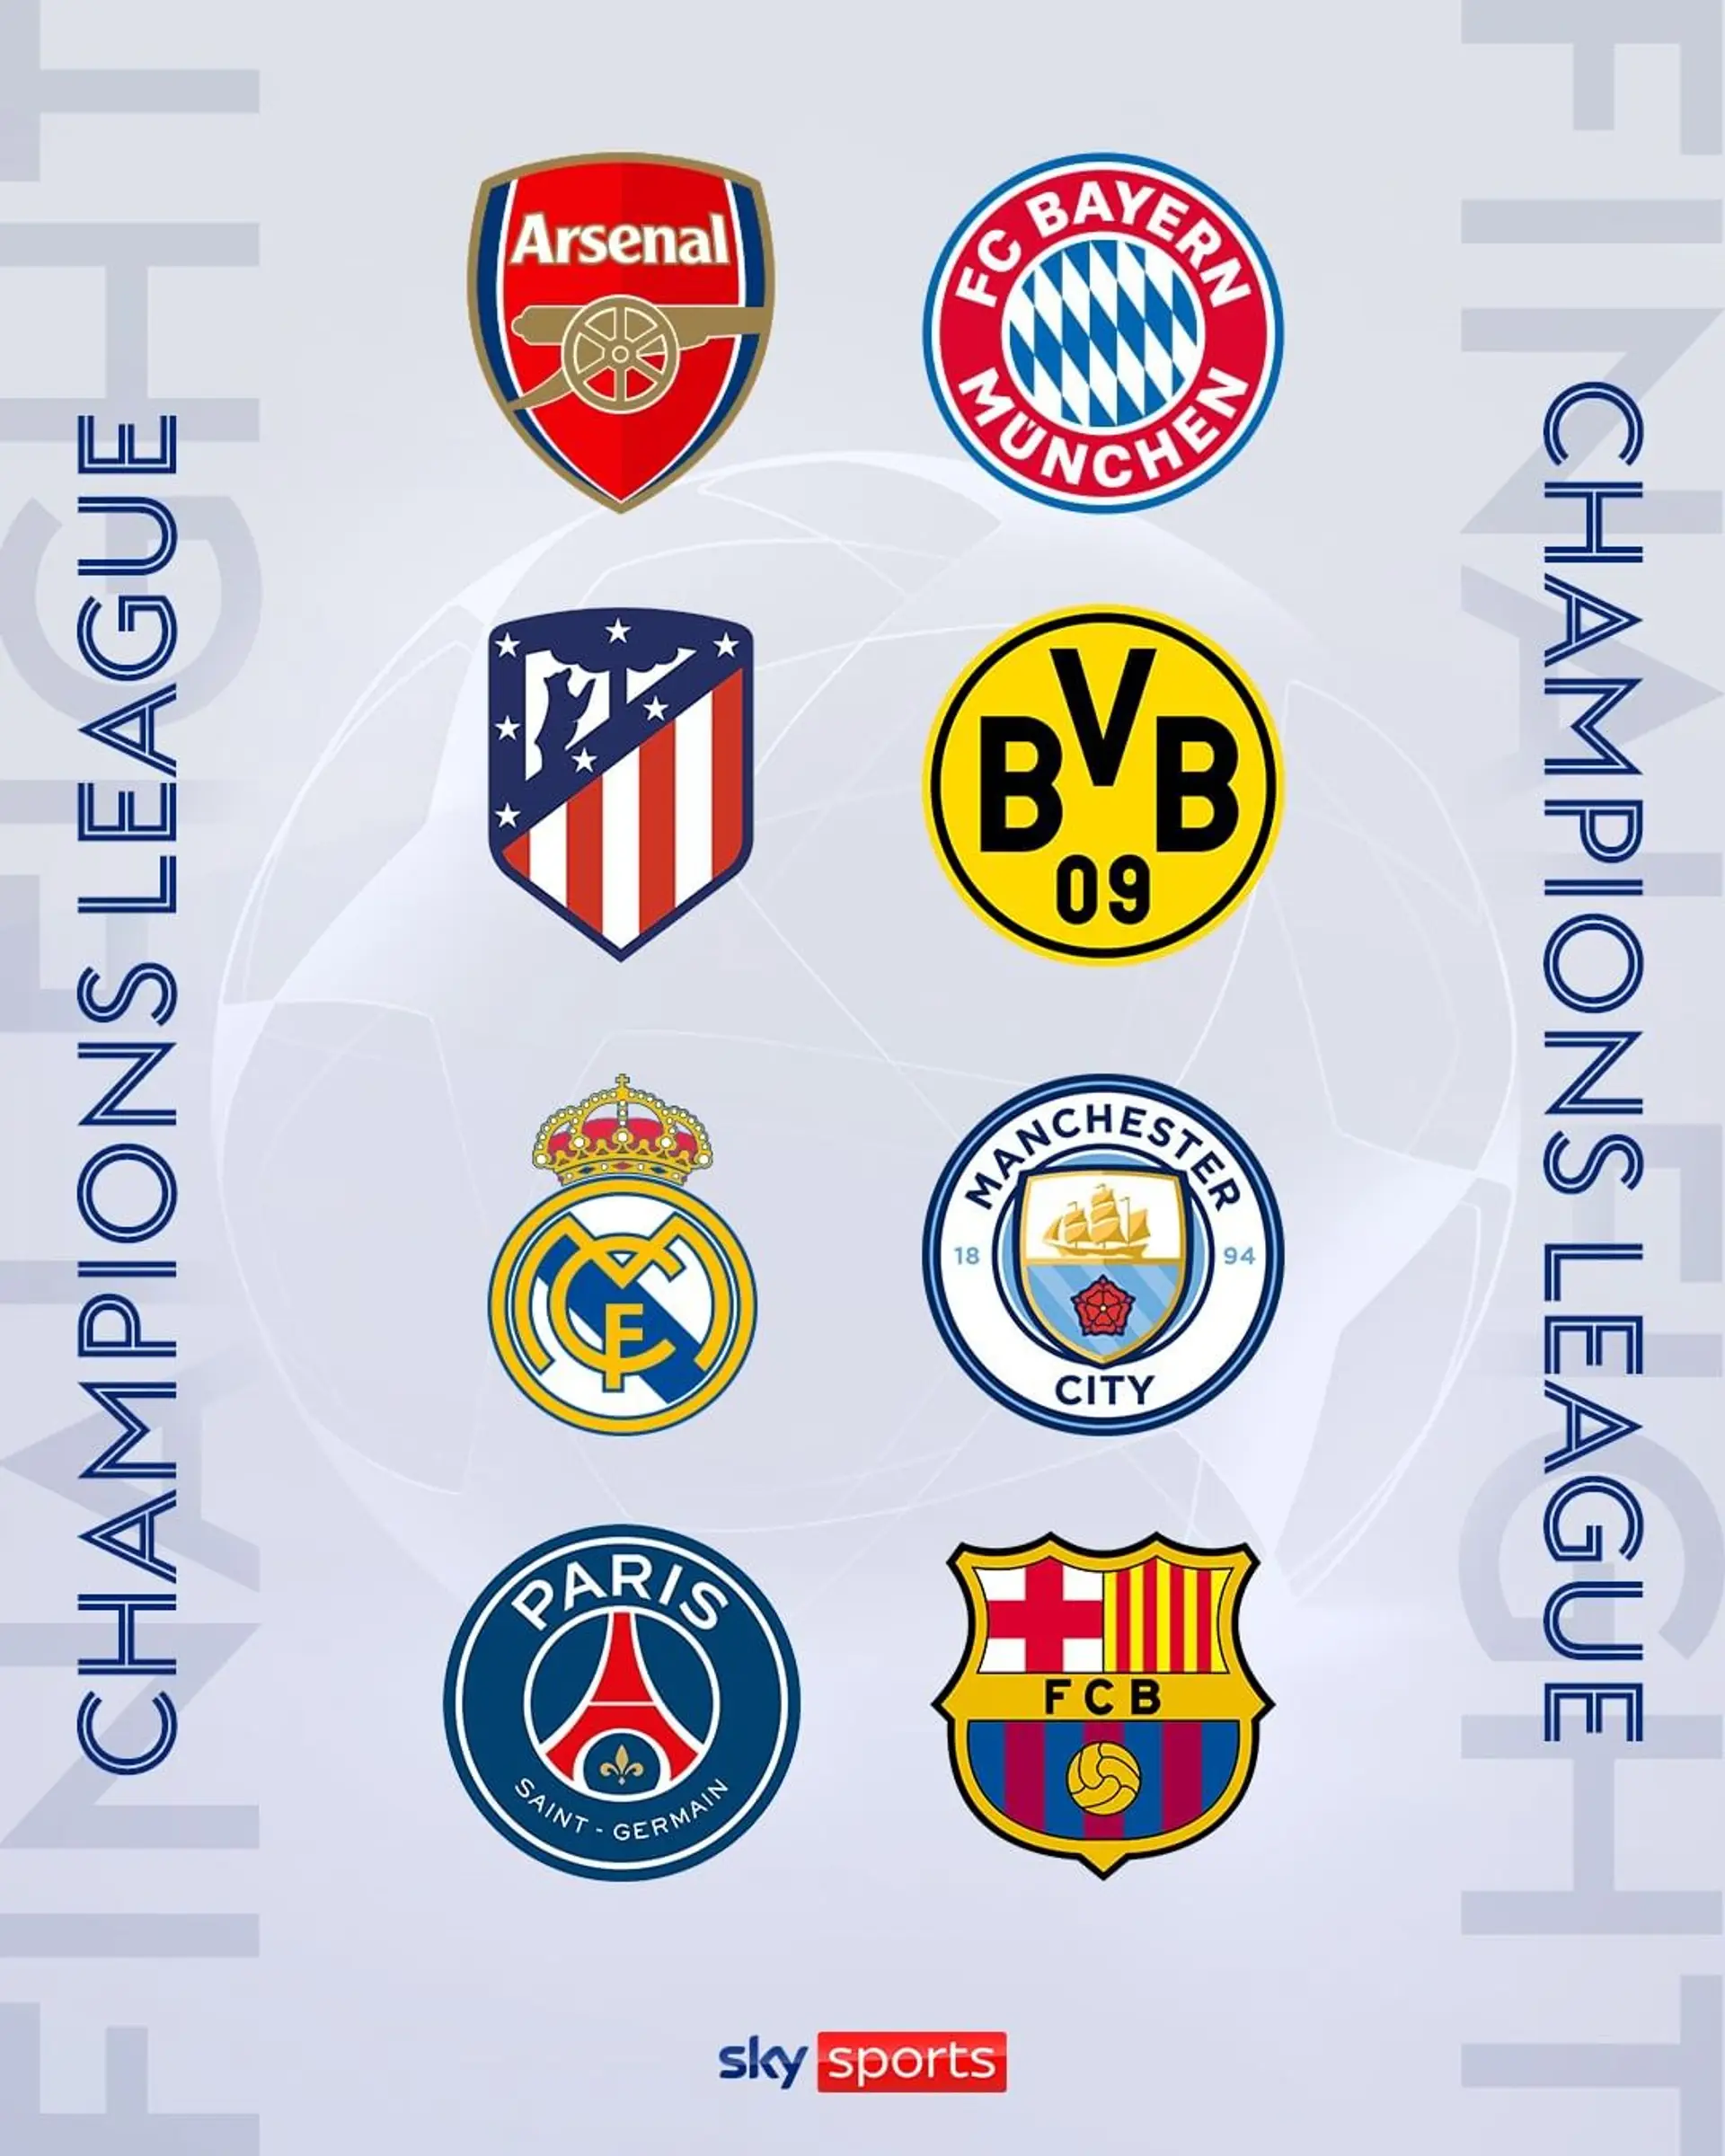 The draws for the Champions League Quarter Finals and Semi Finals have